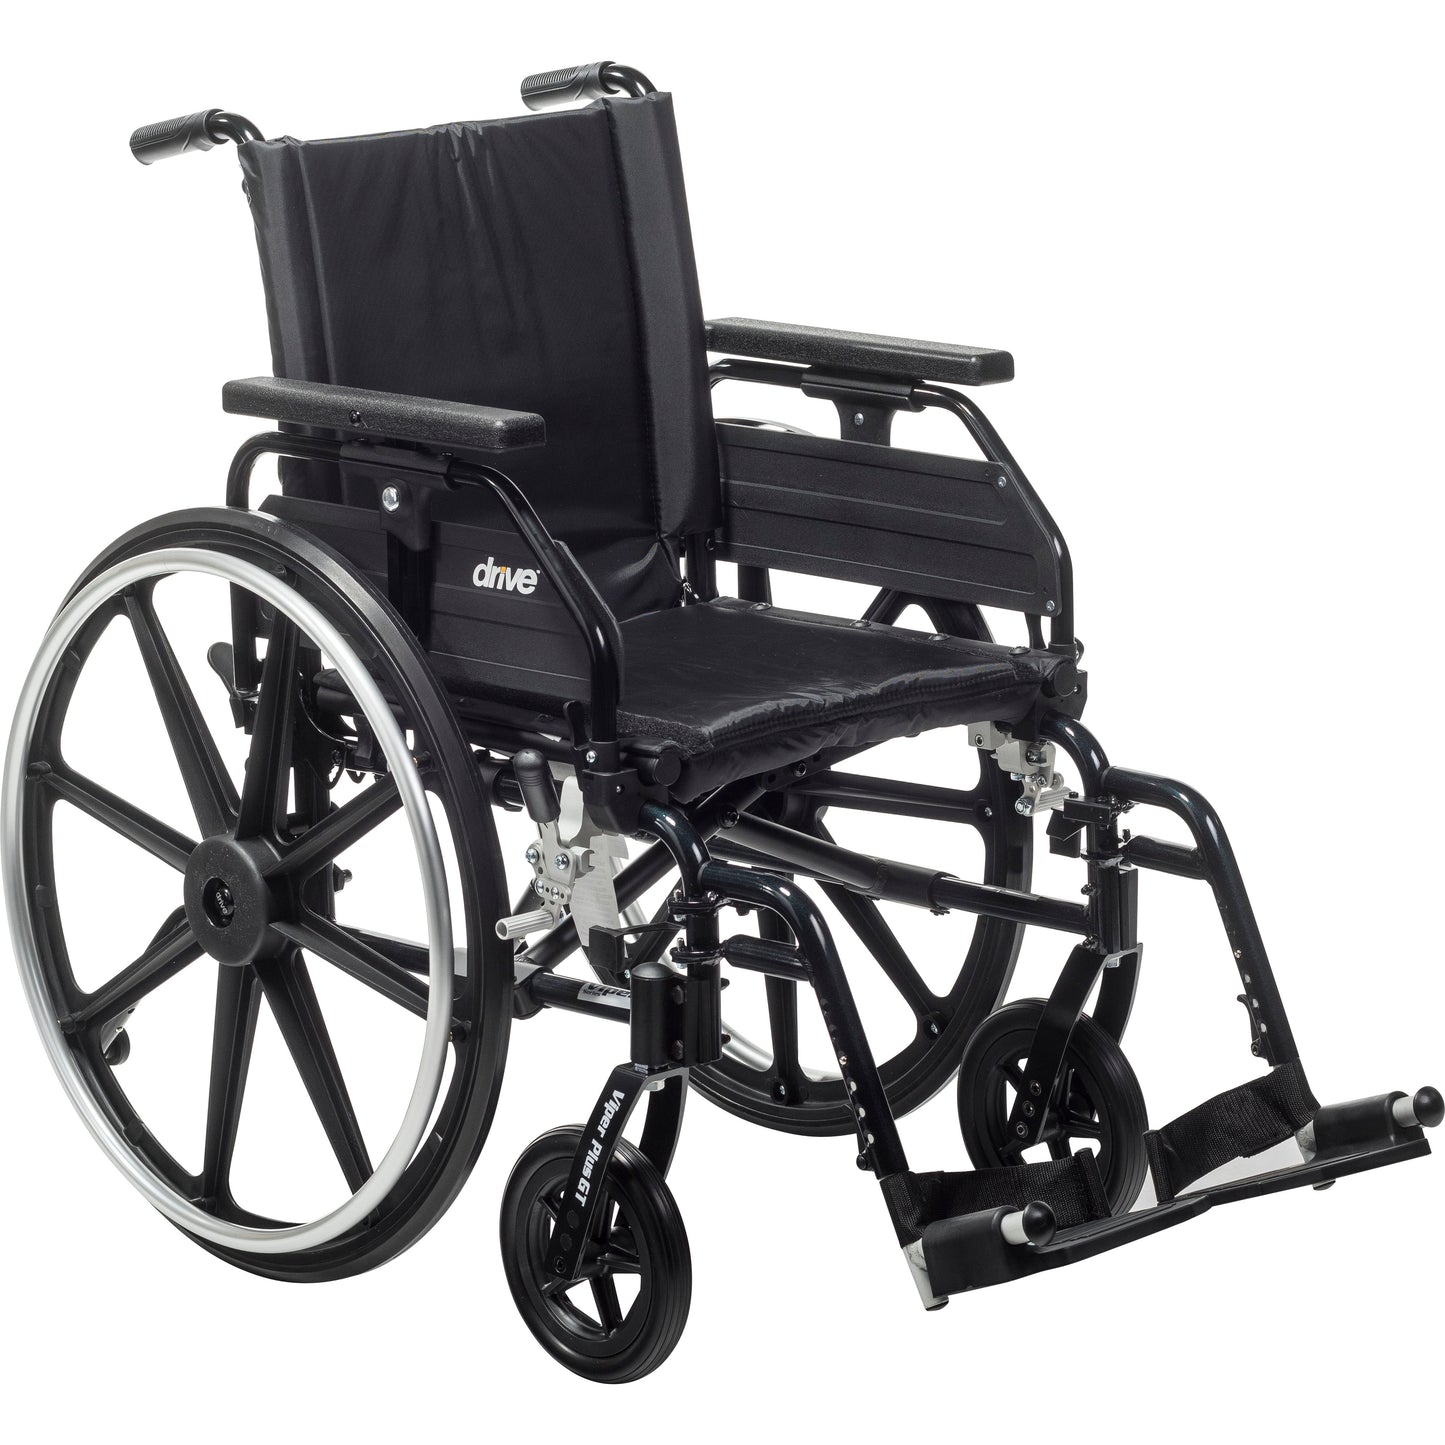 Viper Plus GT Wheelchair with Universal Armrests, Swing-Away Footrests, 22" Seat